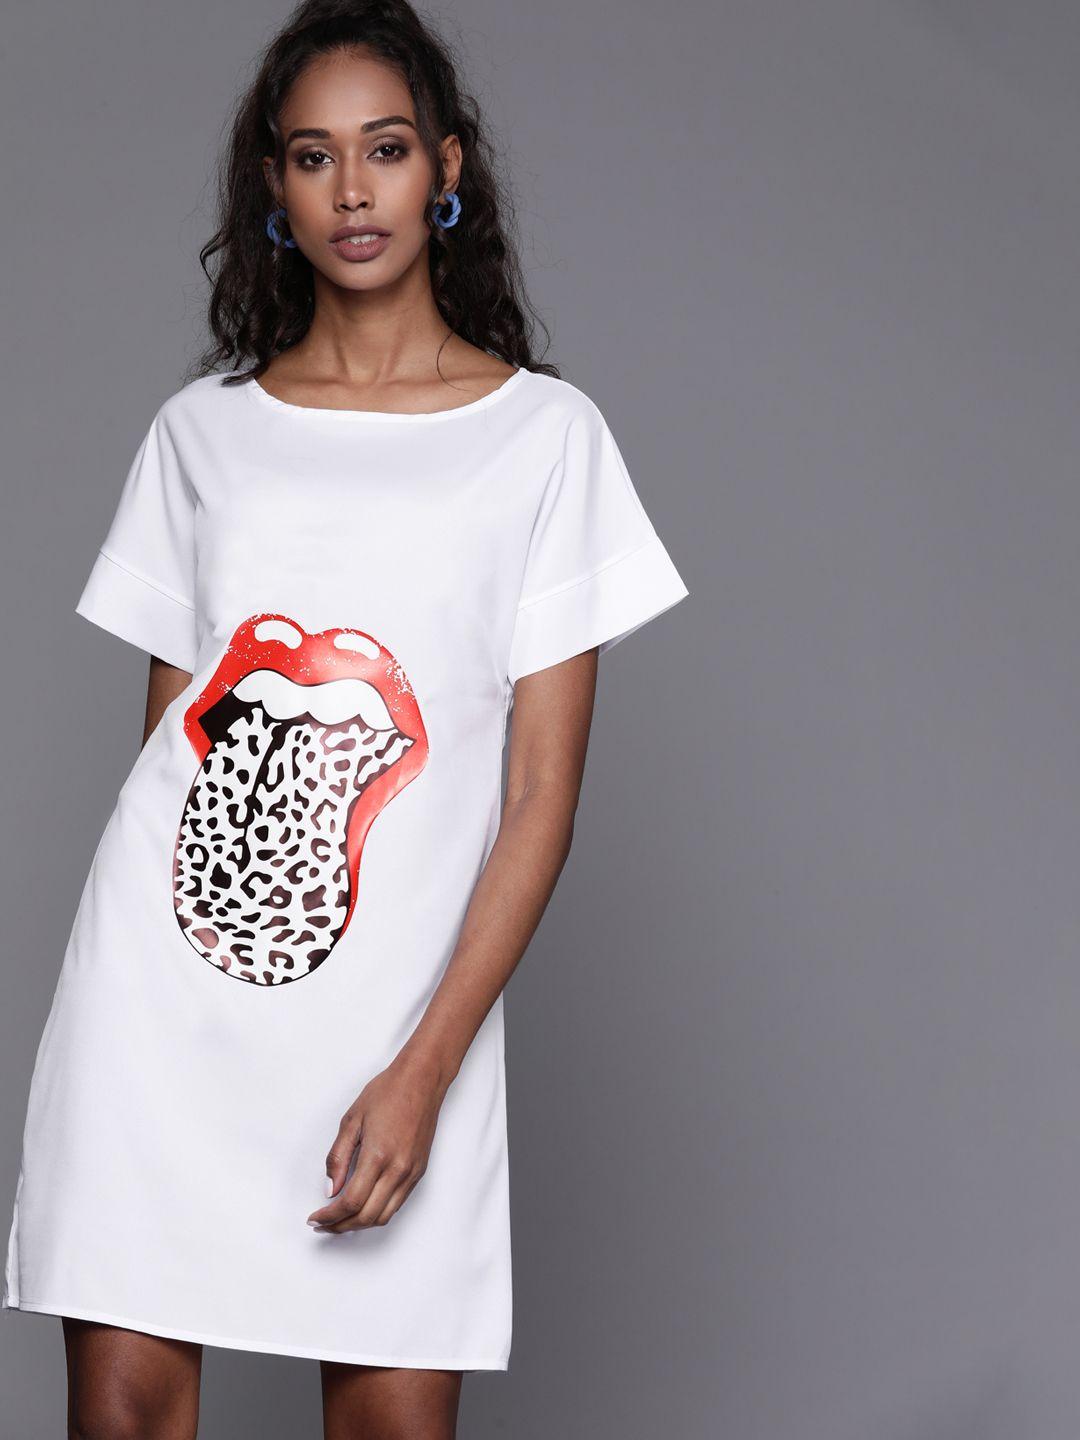 jc mode white & red the rolling stones printed t-shirt dress